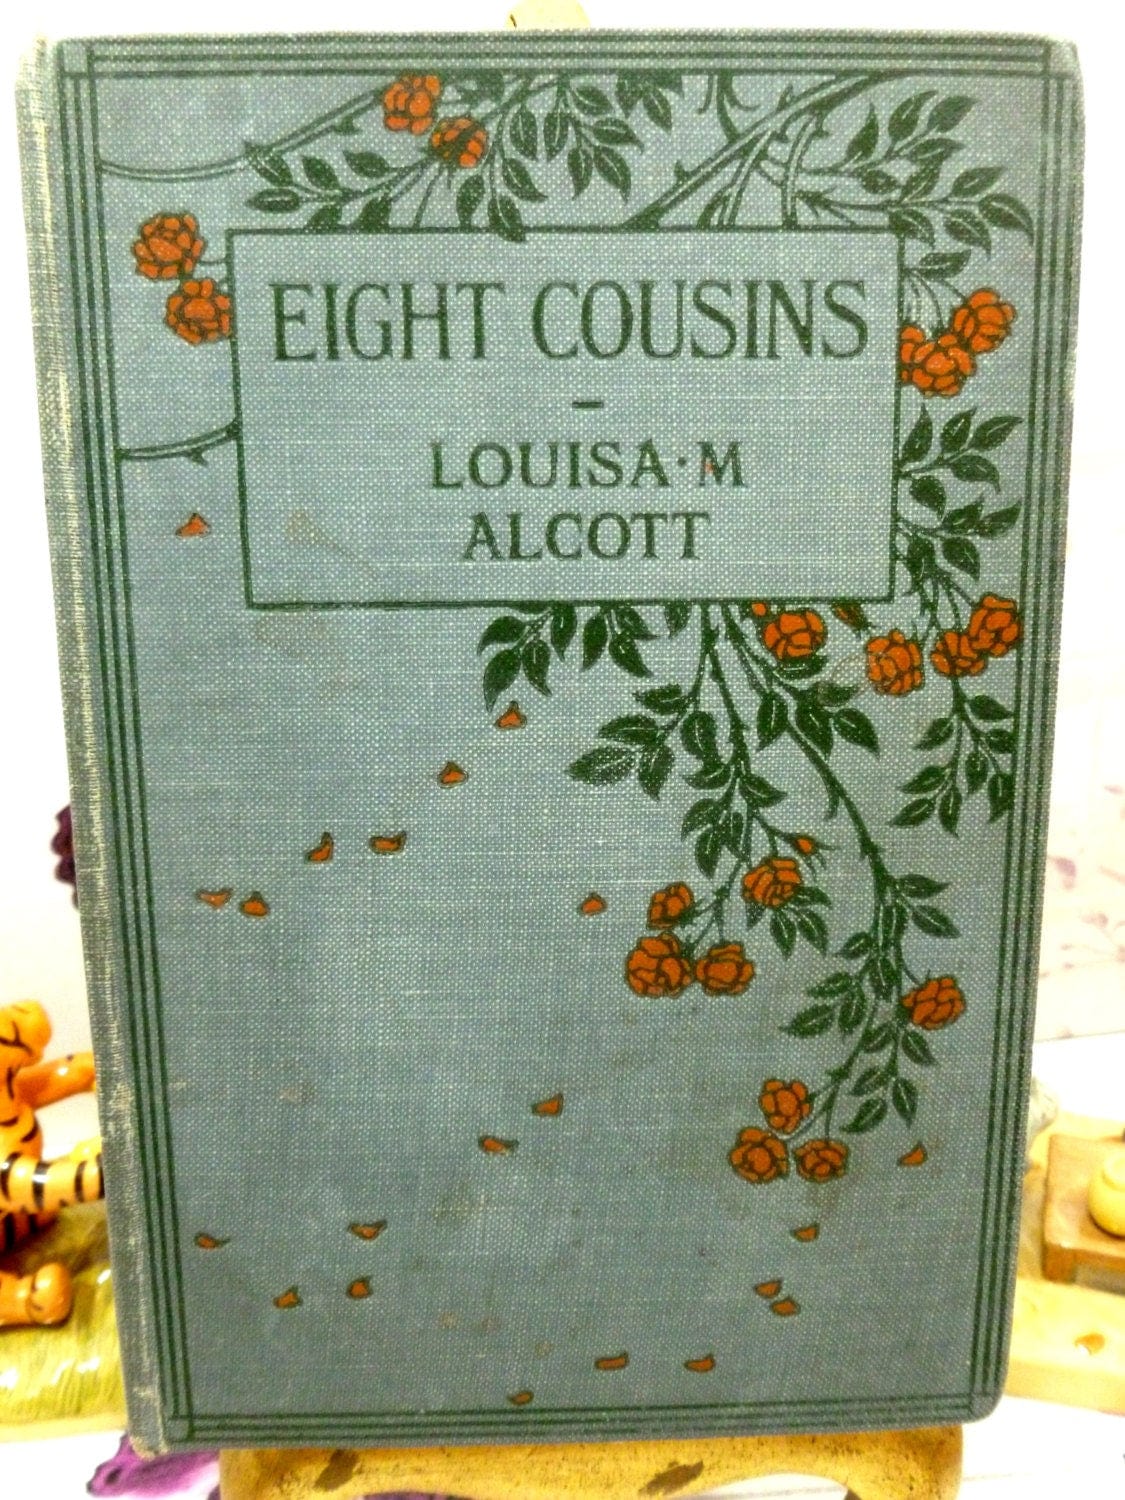 Vintage Book Eight Cousins or the Aunt Hill by  Louisa M Alcott author of Little Women, Good Wives early 1900s edition